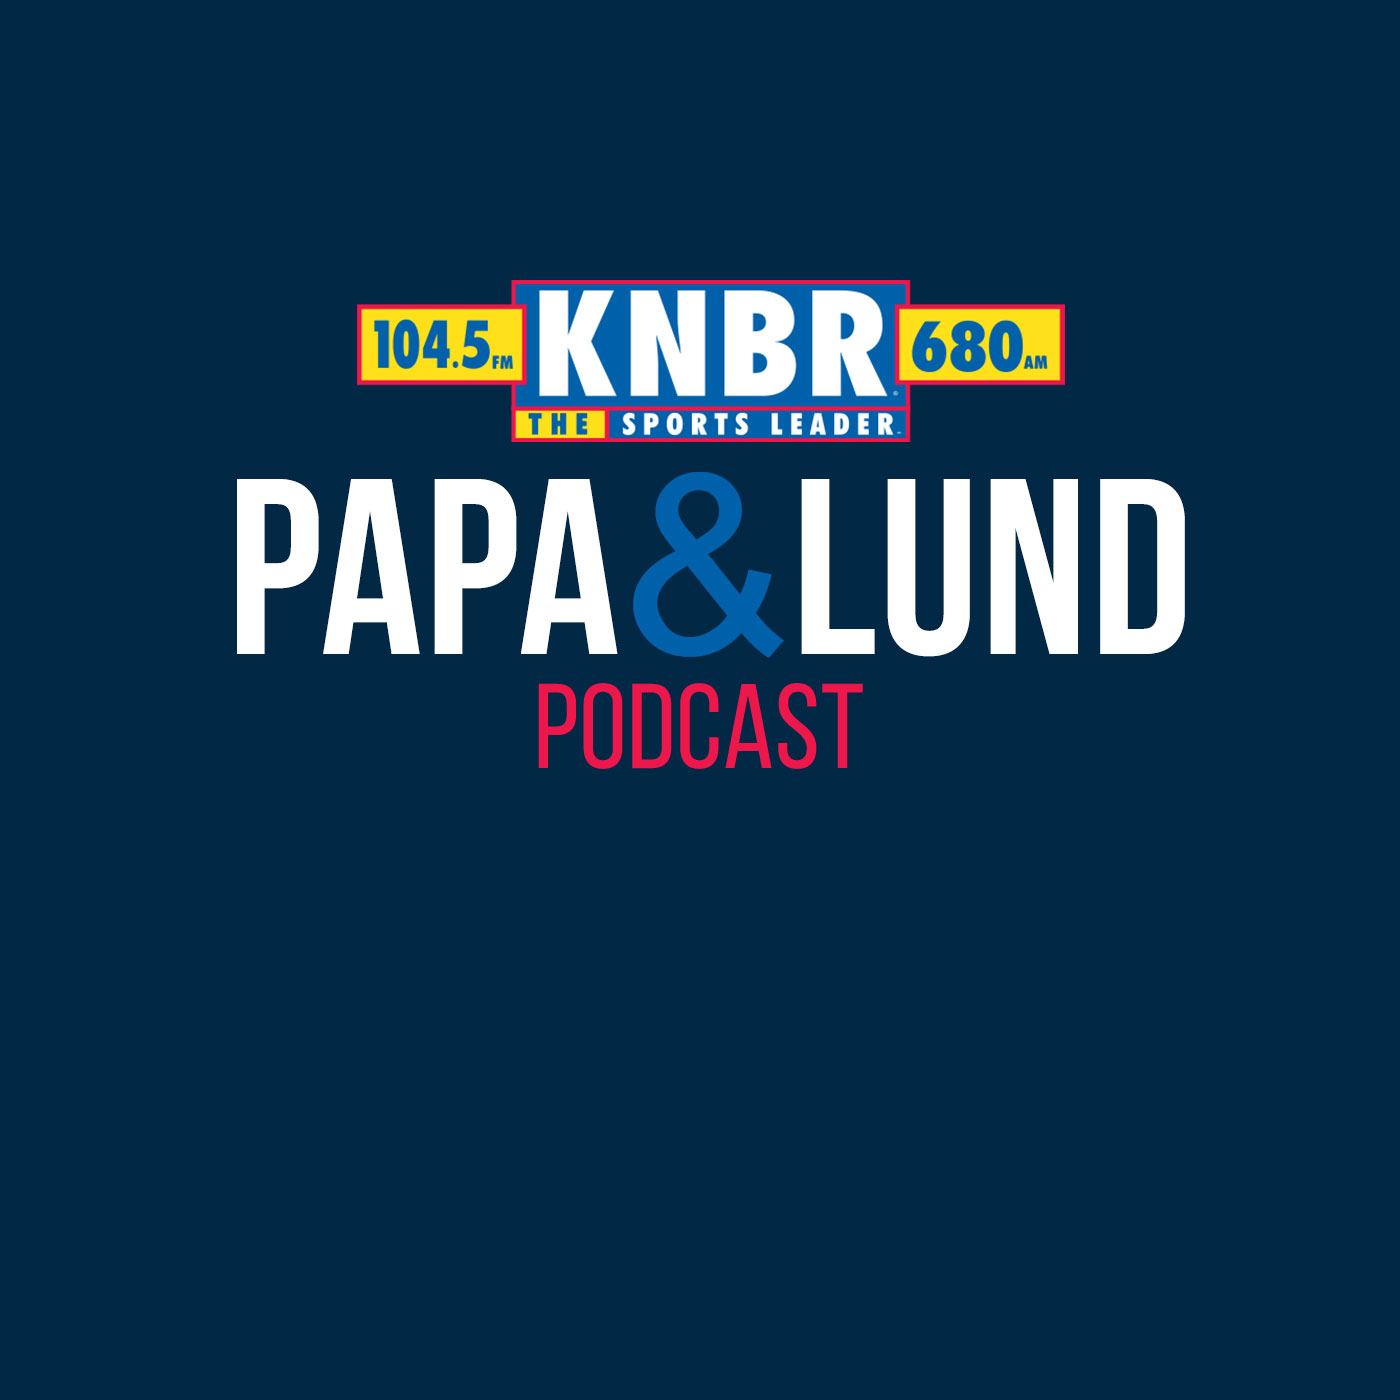 4-22 Eric Byrnes joins Papa & Lund and explained why he is a proponent for Robot Umpires